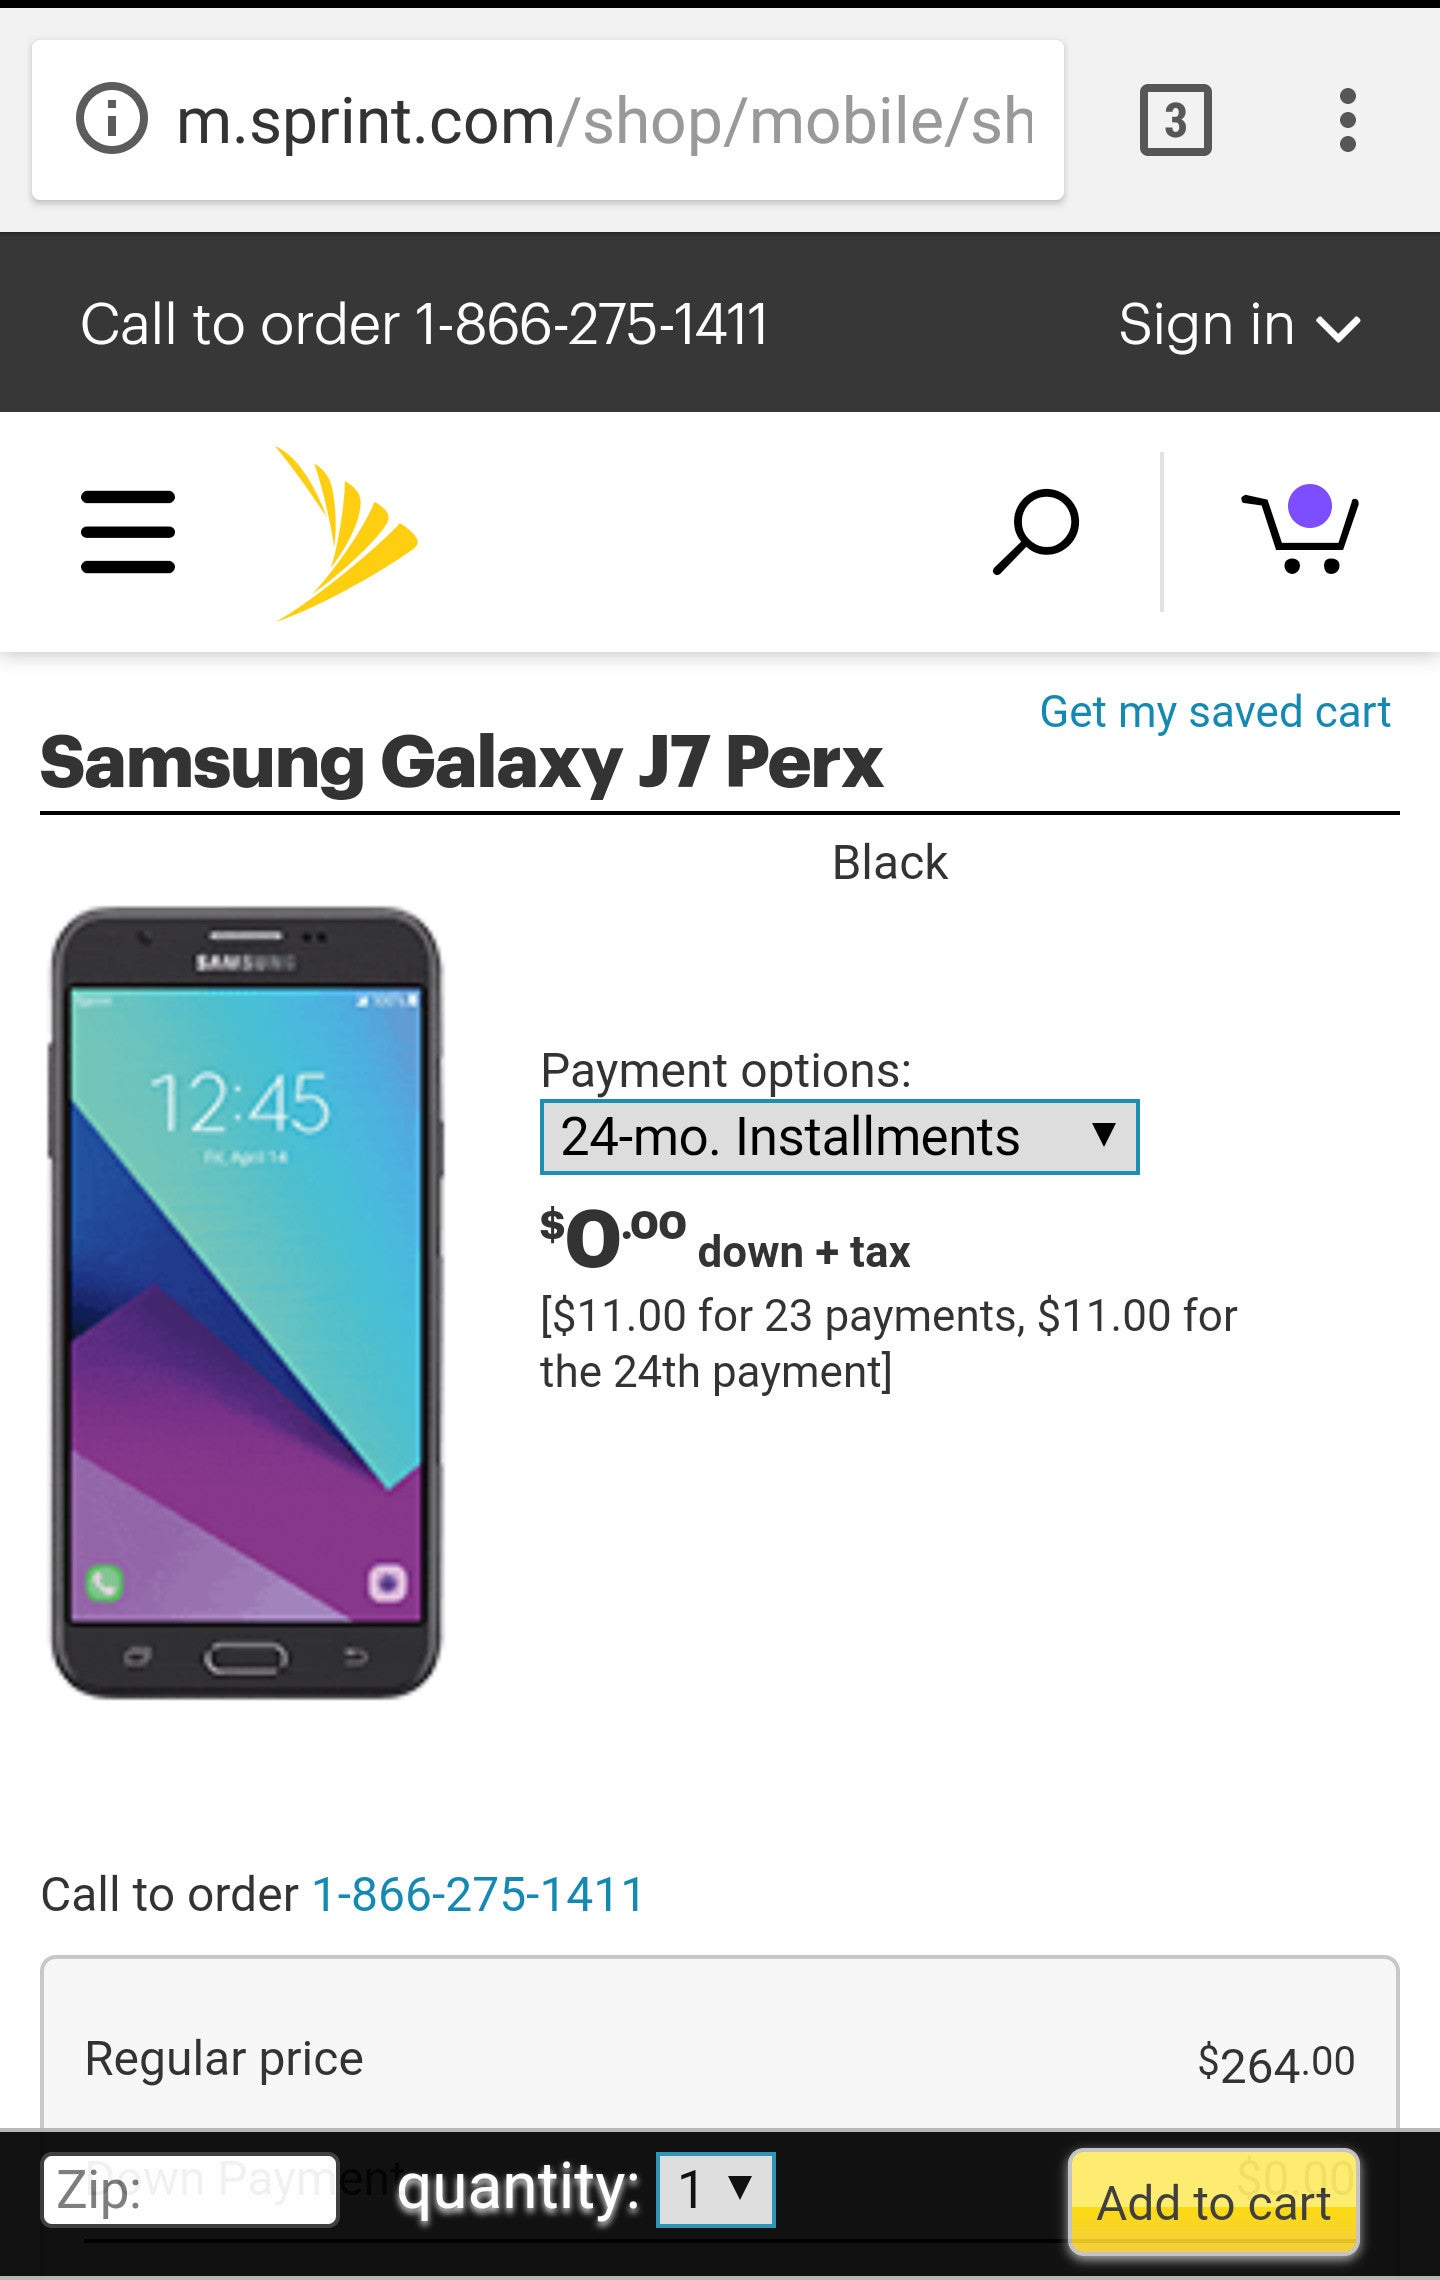 Samsung Galaxy J7 Perx goes live at Sprint, priced to sell for $265